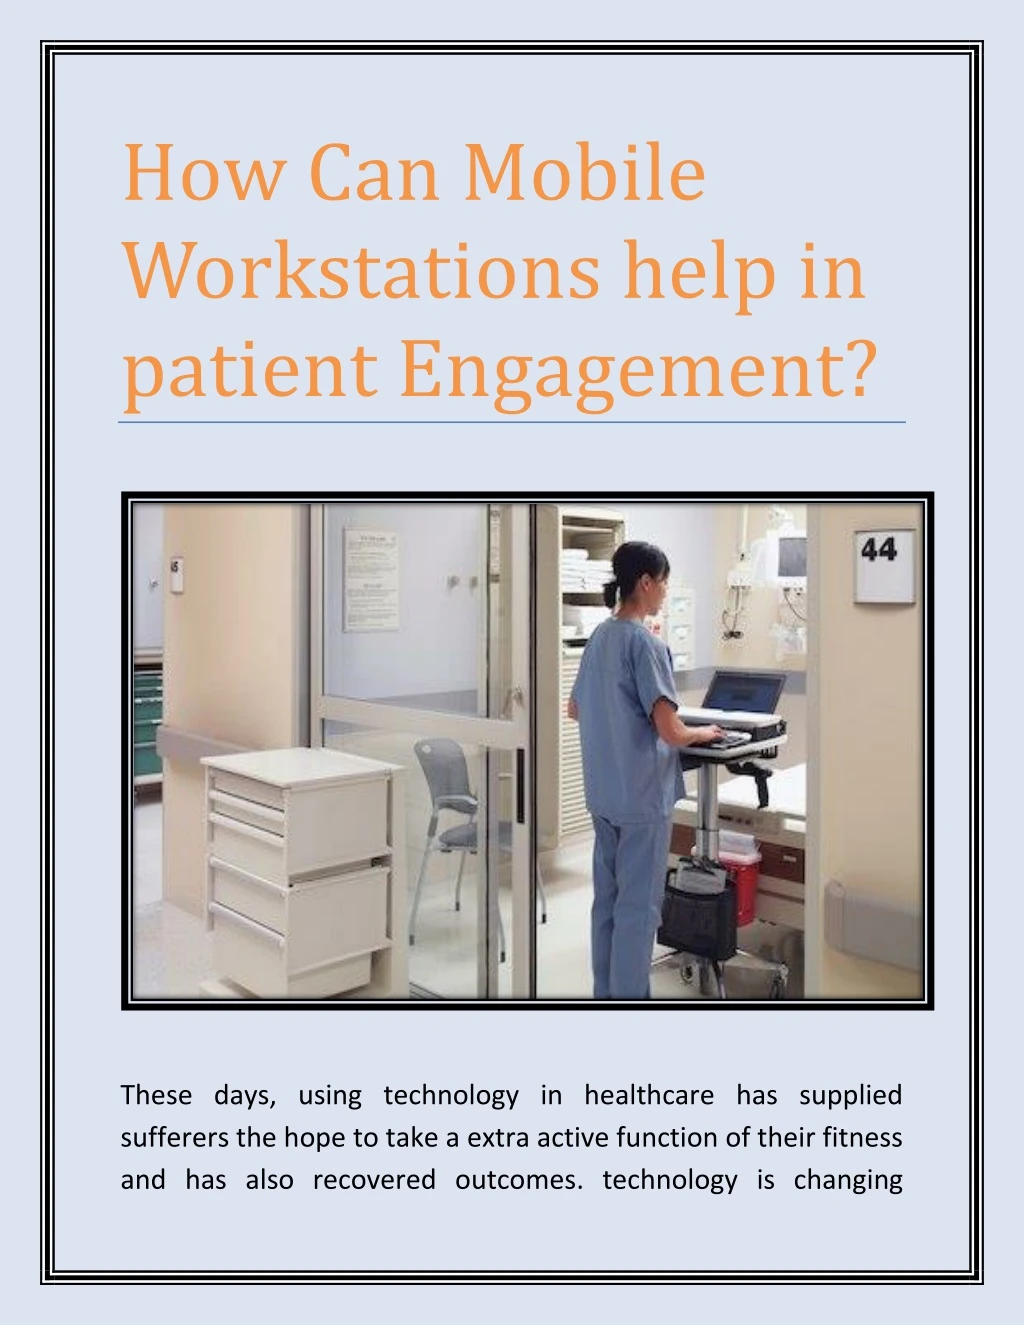 how can mobile workstations help in patient